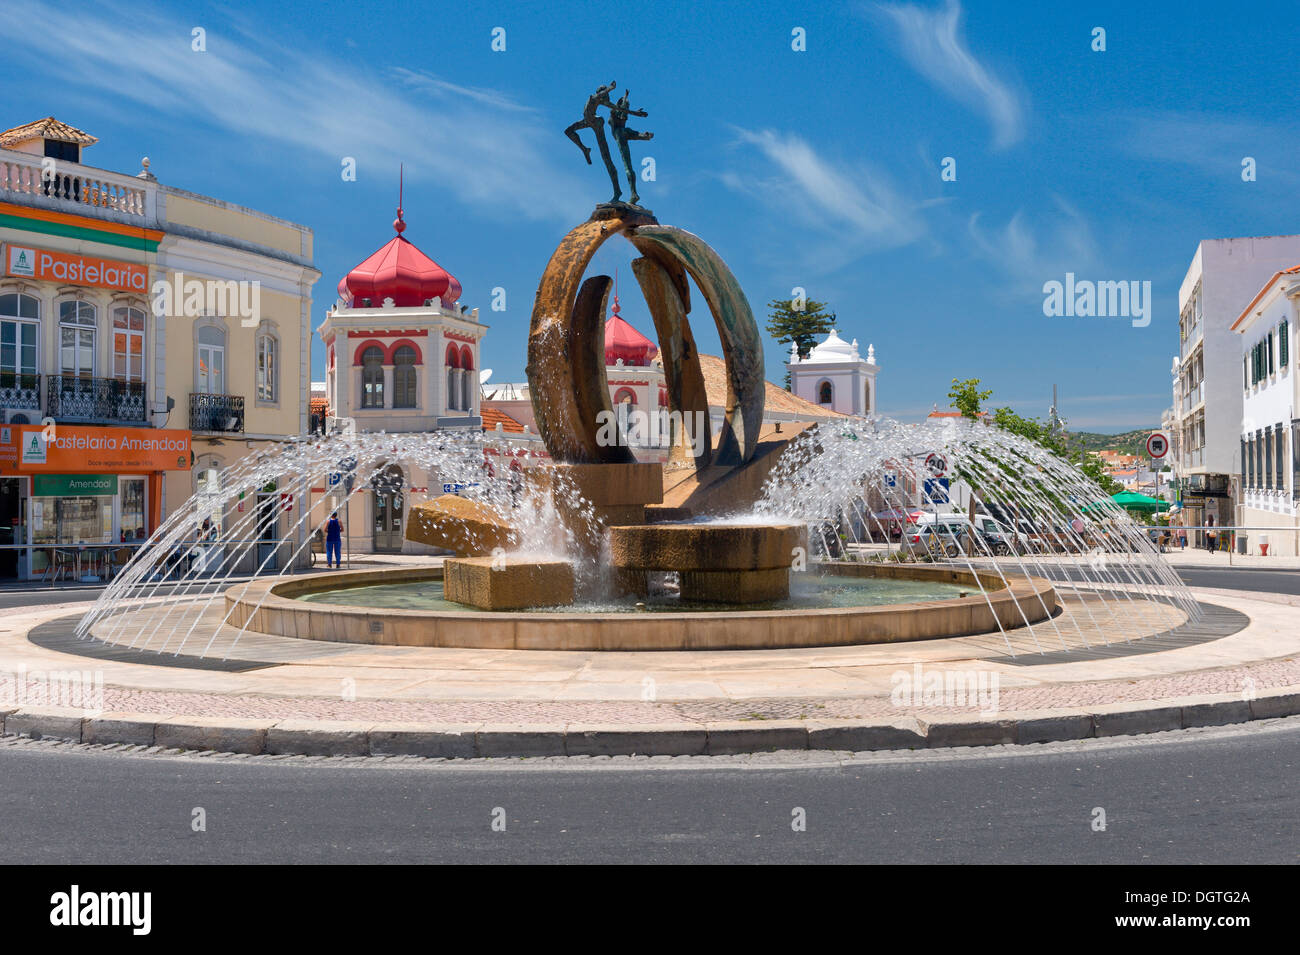 Portugal, the Algarve, Loulé town centre, the fountain roundabout with modern sculpture Stock Photo